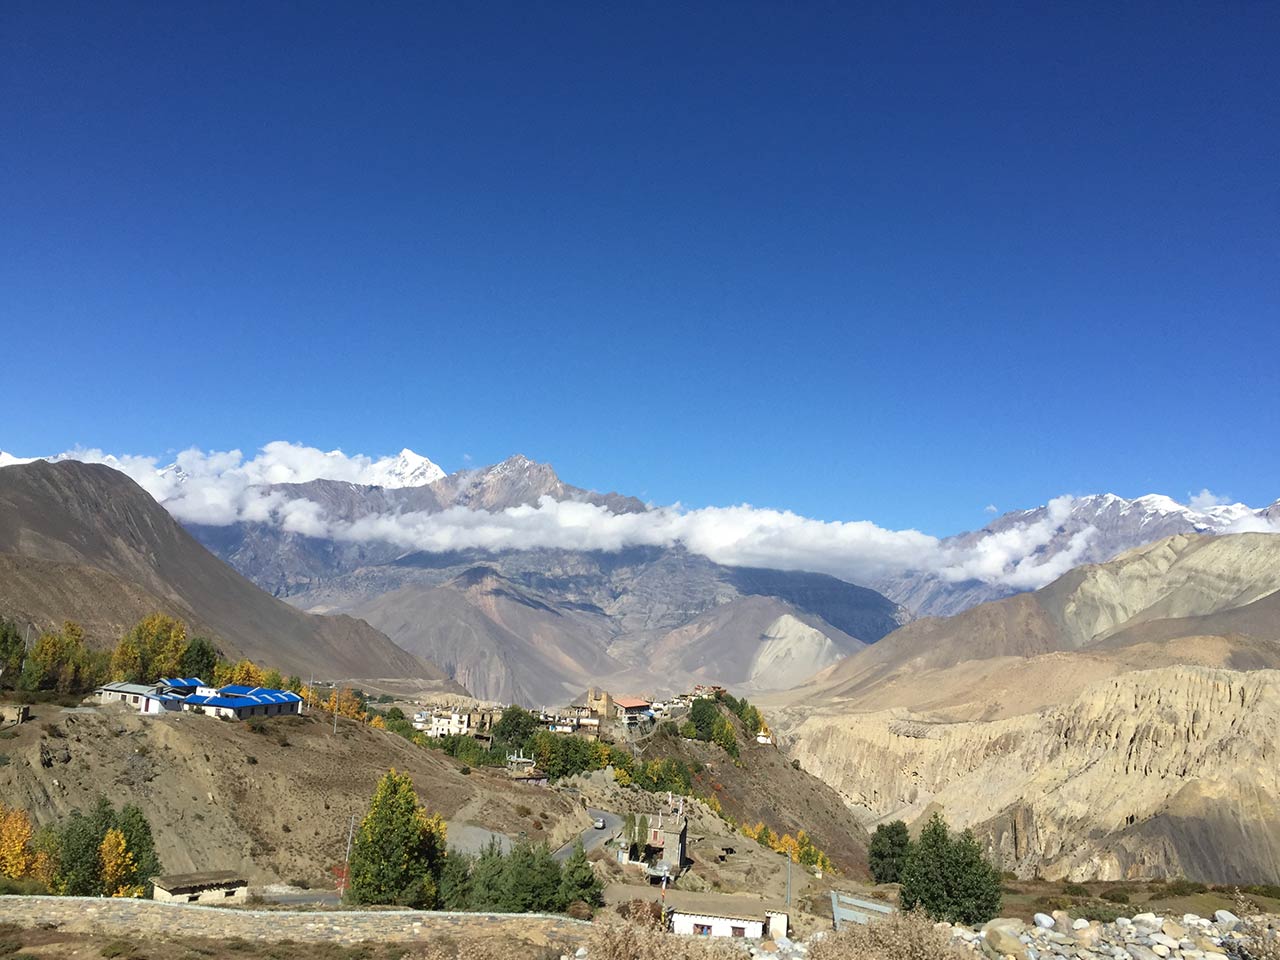 Kingdom of Lo Manthang and Muktinath Temple